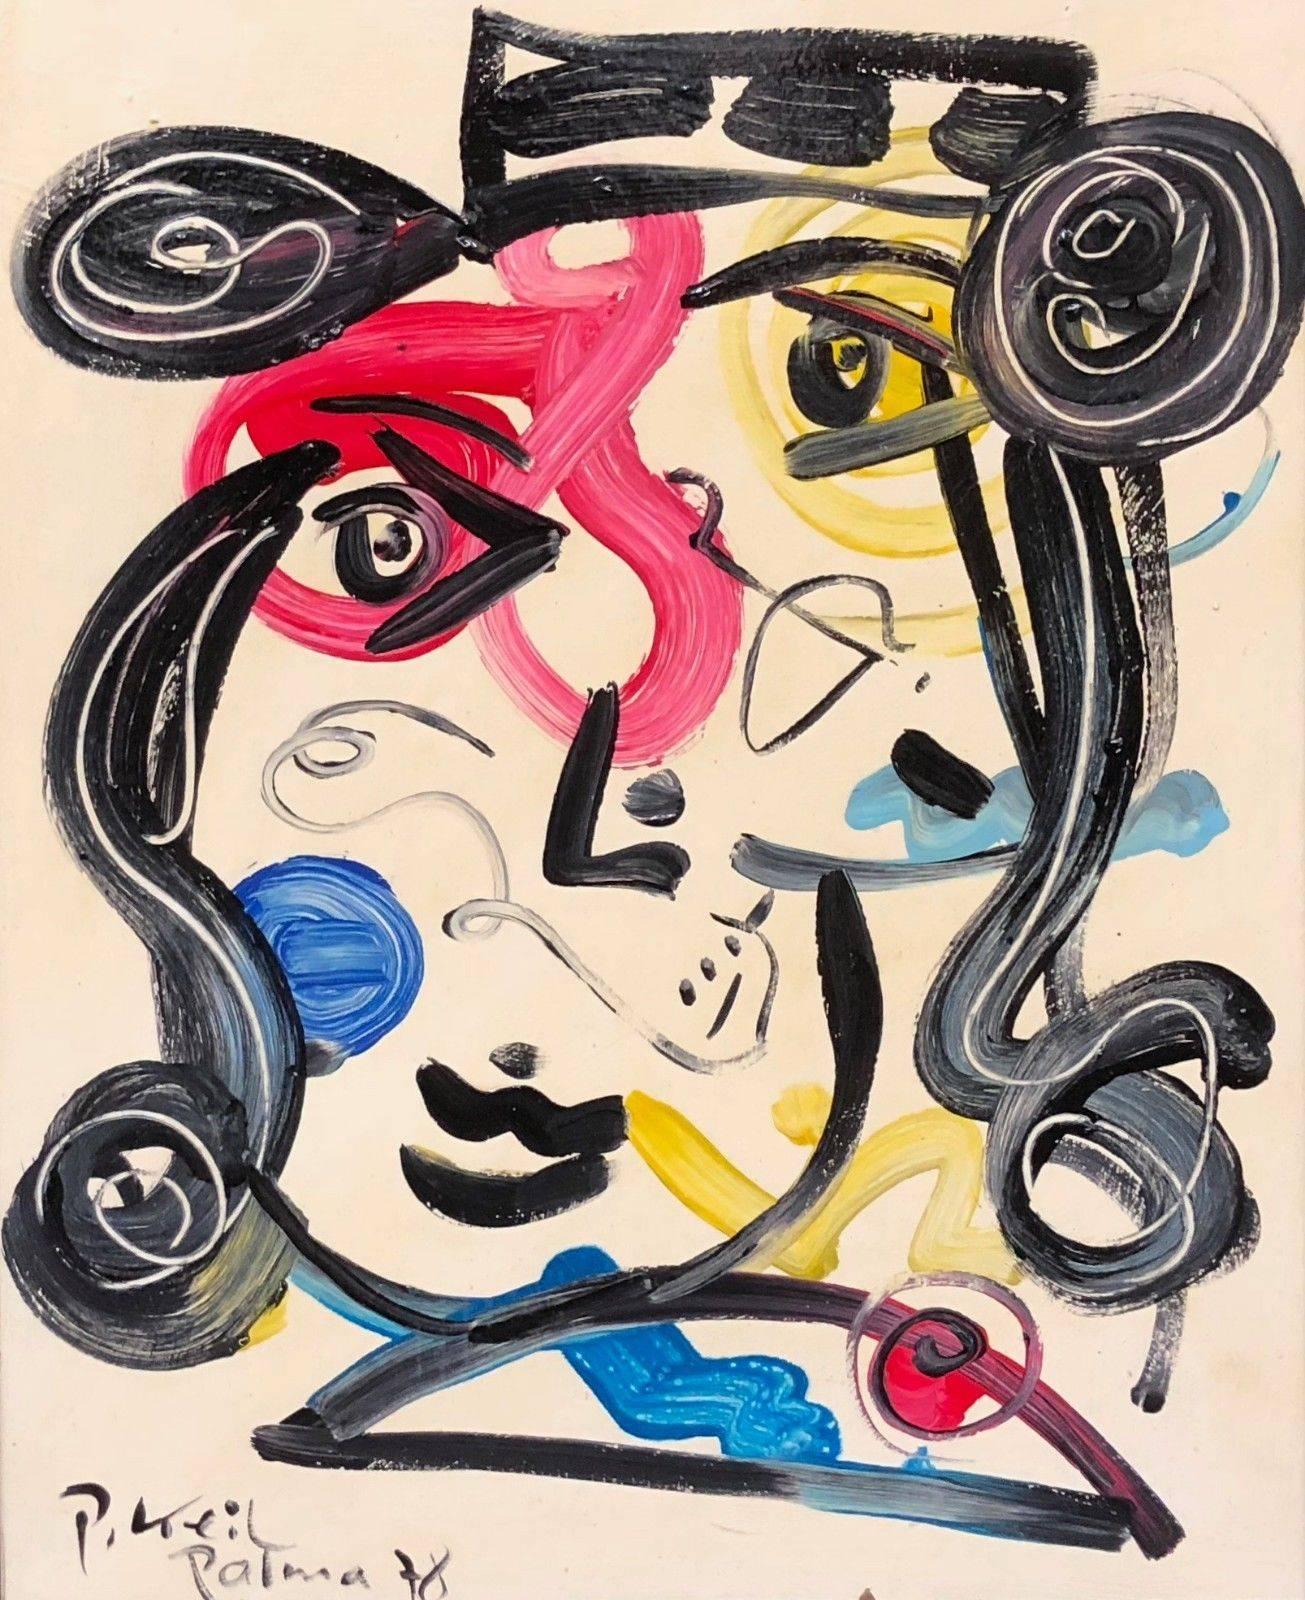 Abstract oil painting titled 'Spanish Woman', painted in 1978 by Peter Robert Keil in Palma. Signed and dated on the front and on the back. The piece is in great vintage condition and has a 